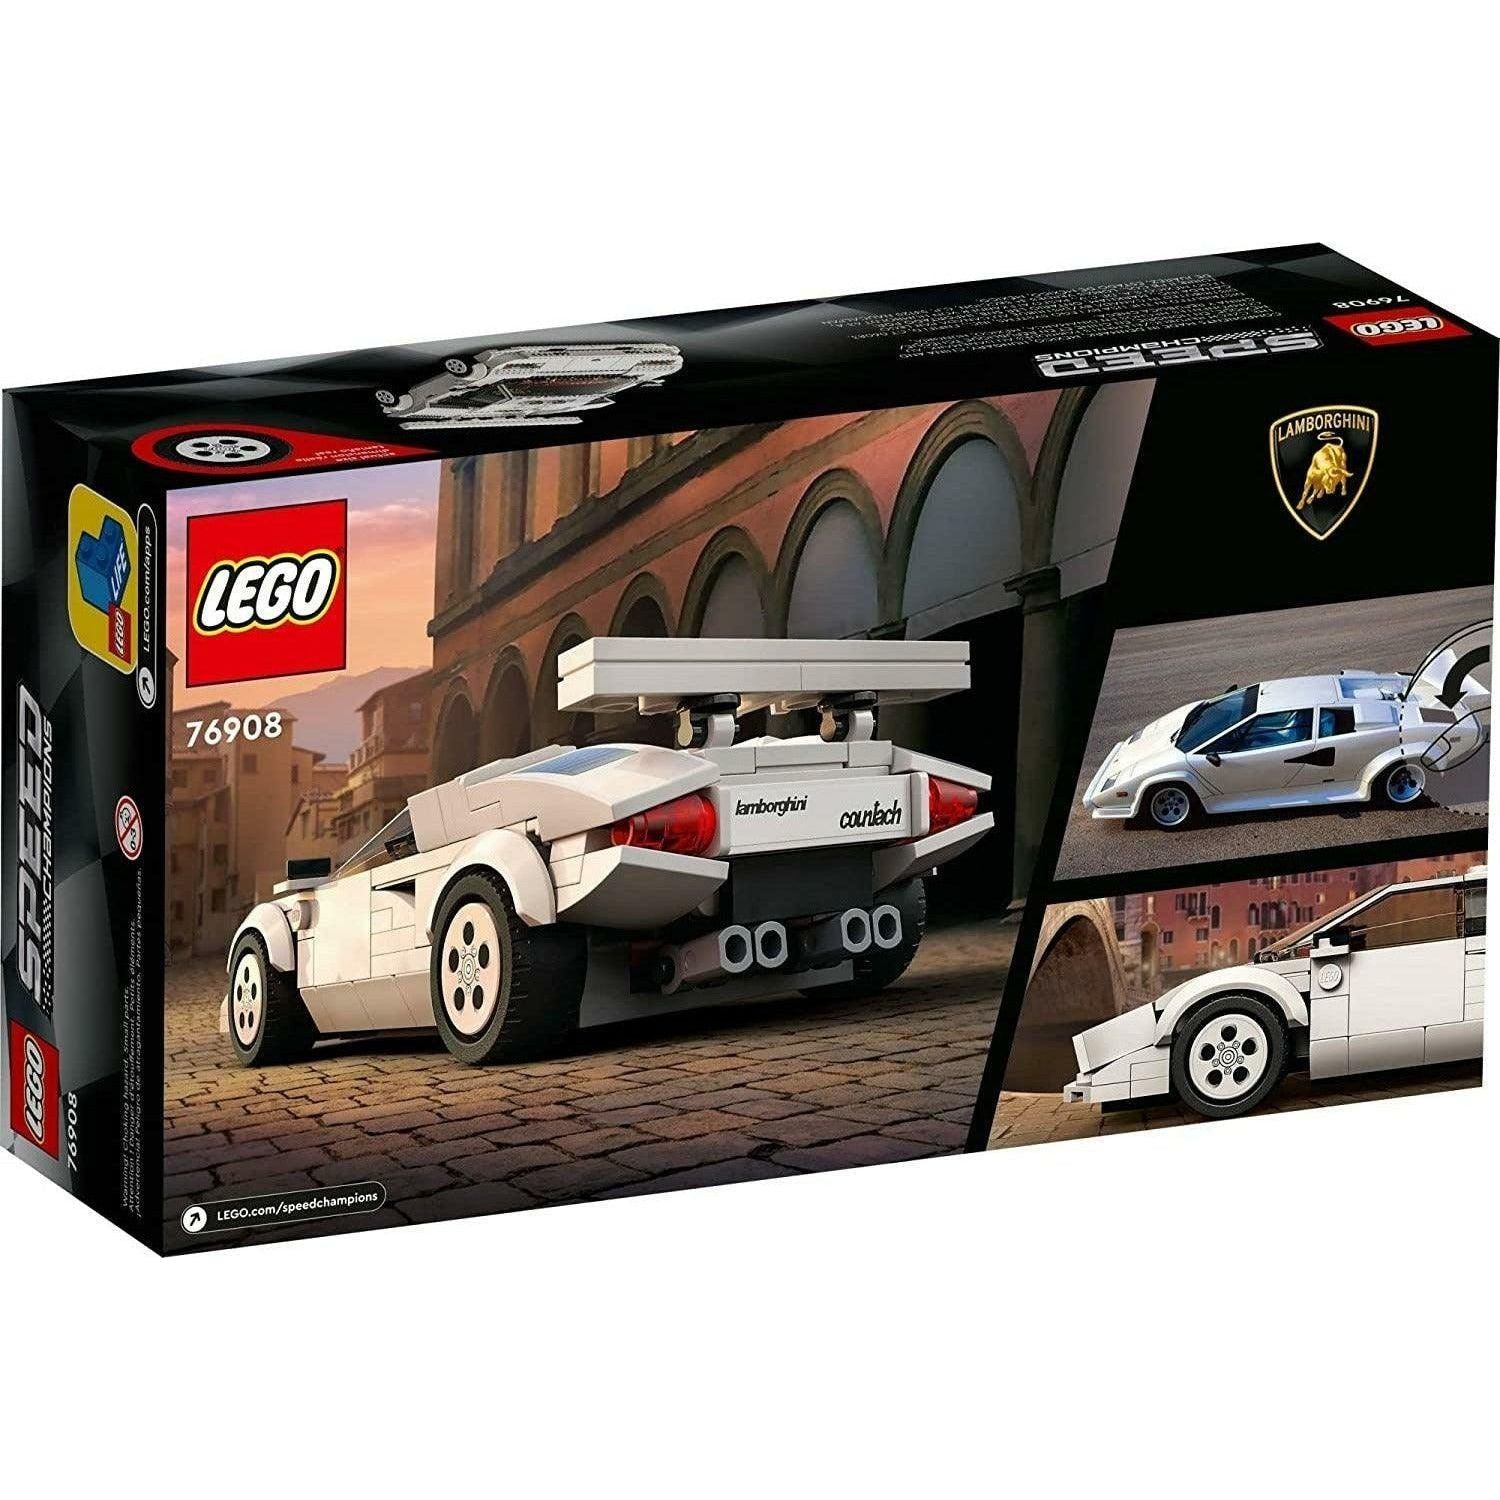 LEGO Speed Champions Lamborghini Countach 76908 Building Kit; Collectible Model of the Iconic 1970’s Super Sports Car - BumbleToys - 8+ Years, 8-13 Years, Boys, LEGO, OXE, Pre-Order